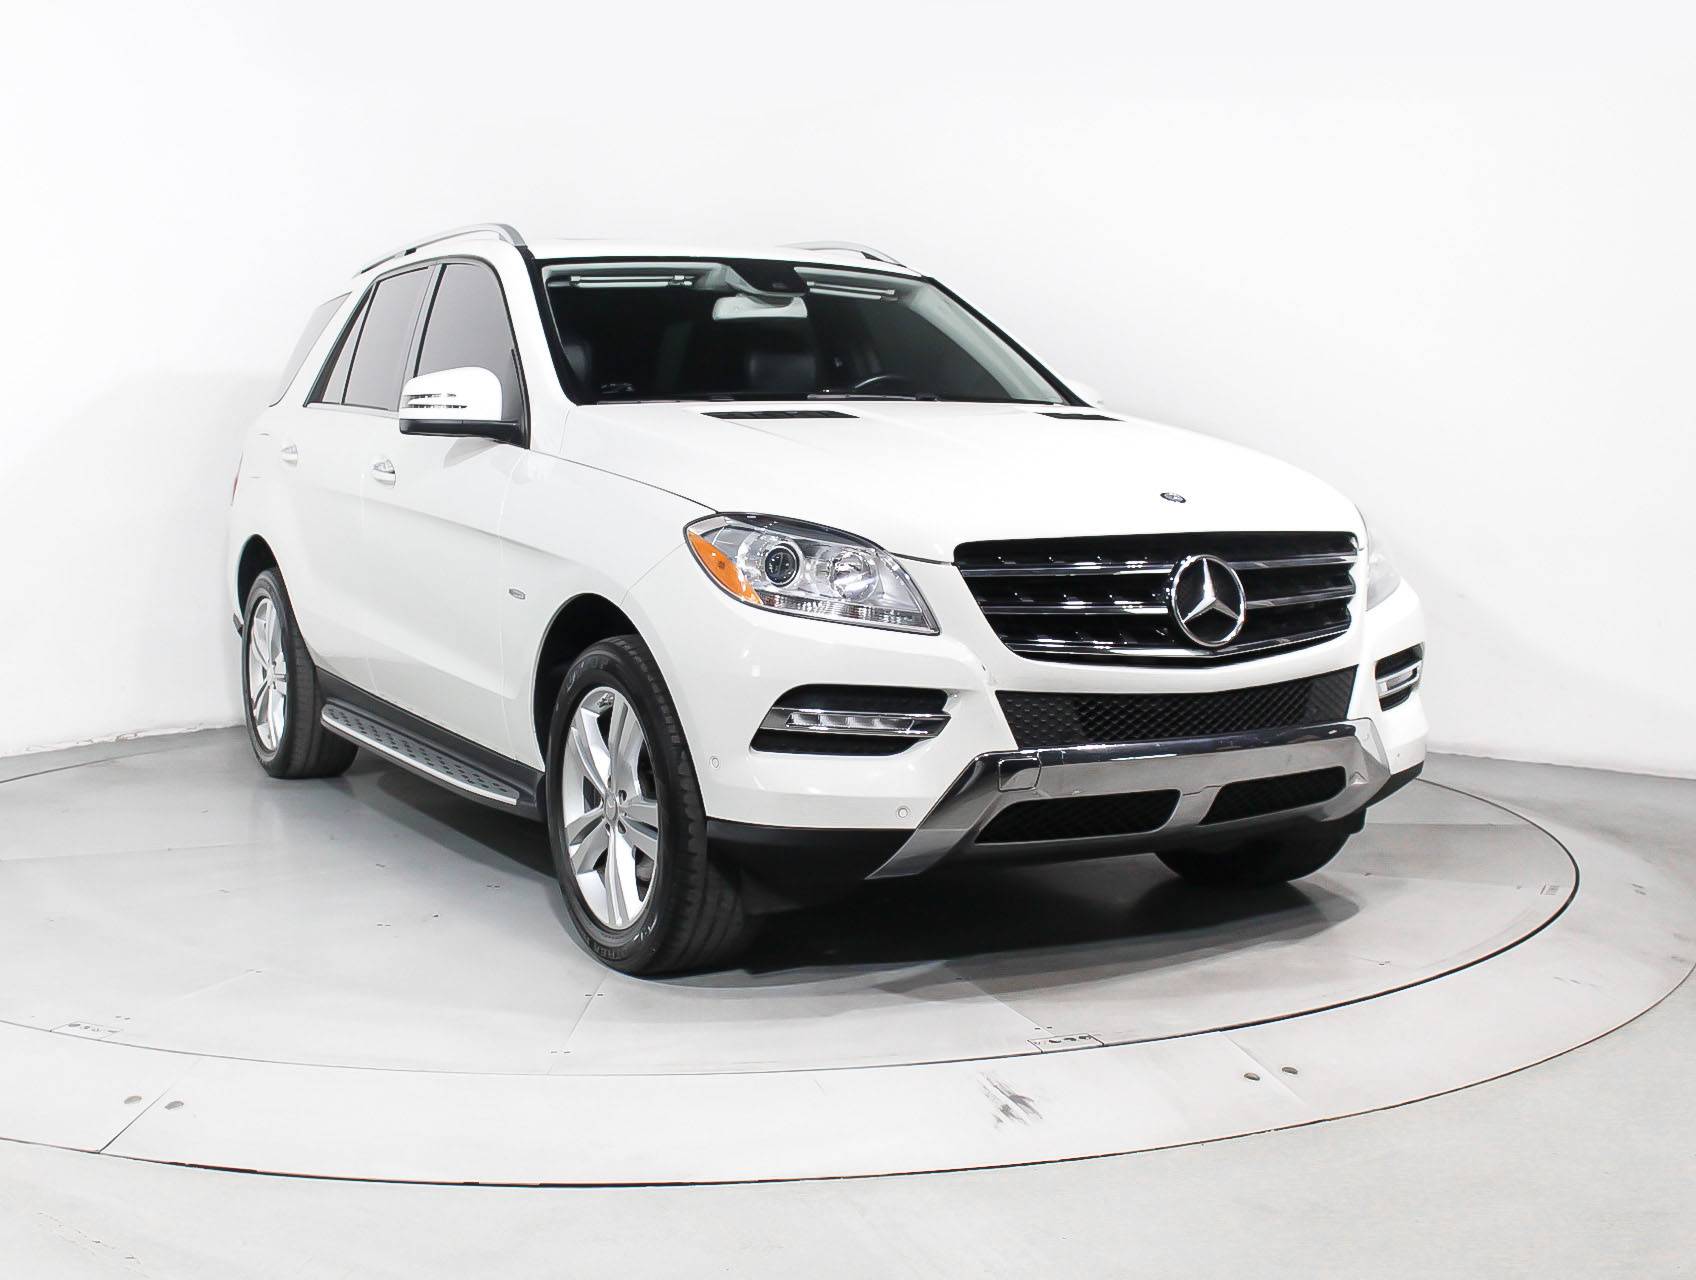 Florida Fine Cars - Used MERCEDES-BENZ M CLASS 2012 HOLLYWOOD Ml350 4matic Awd